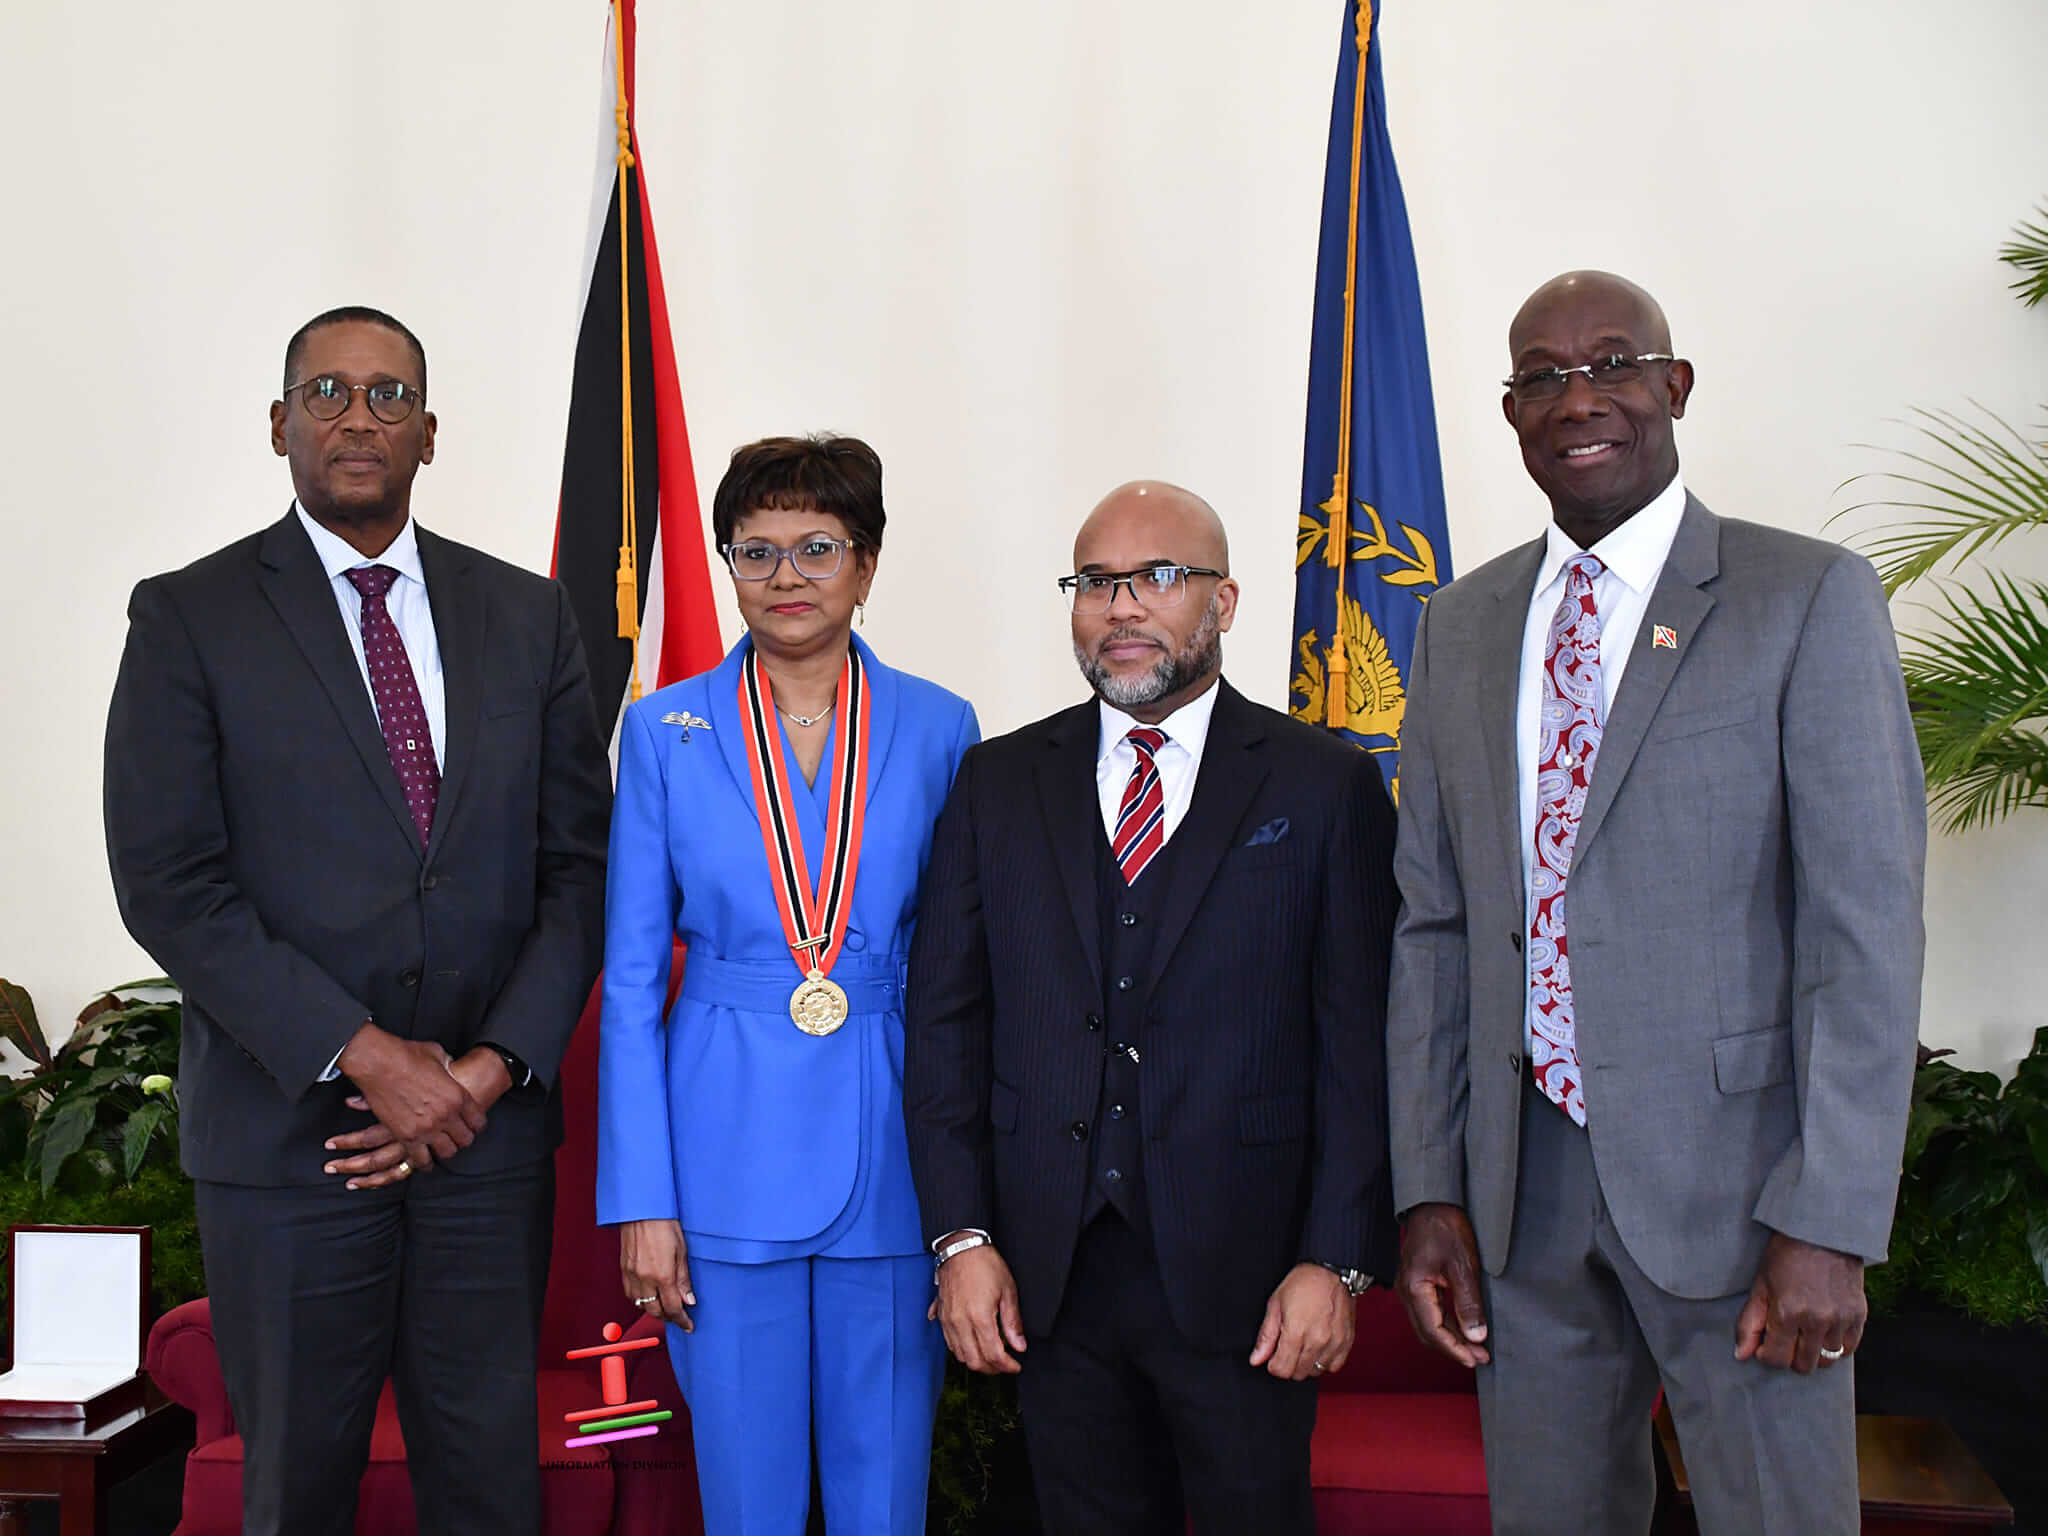 Her Excellency Receives the Order of the Republic of Trinidad and Tobago